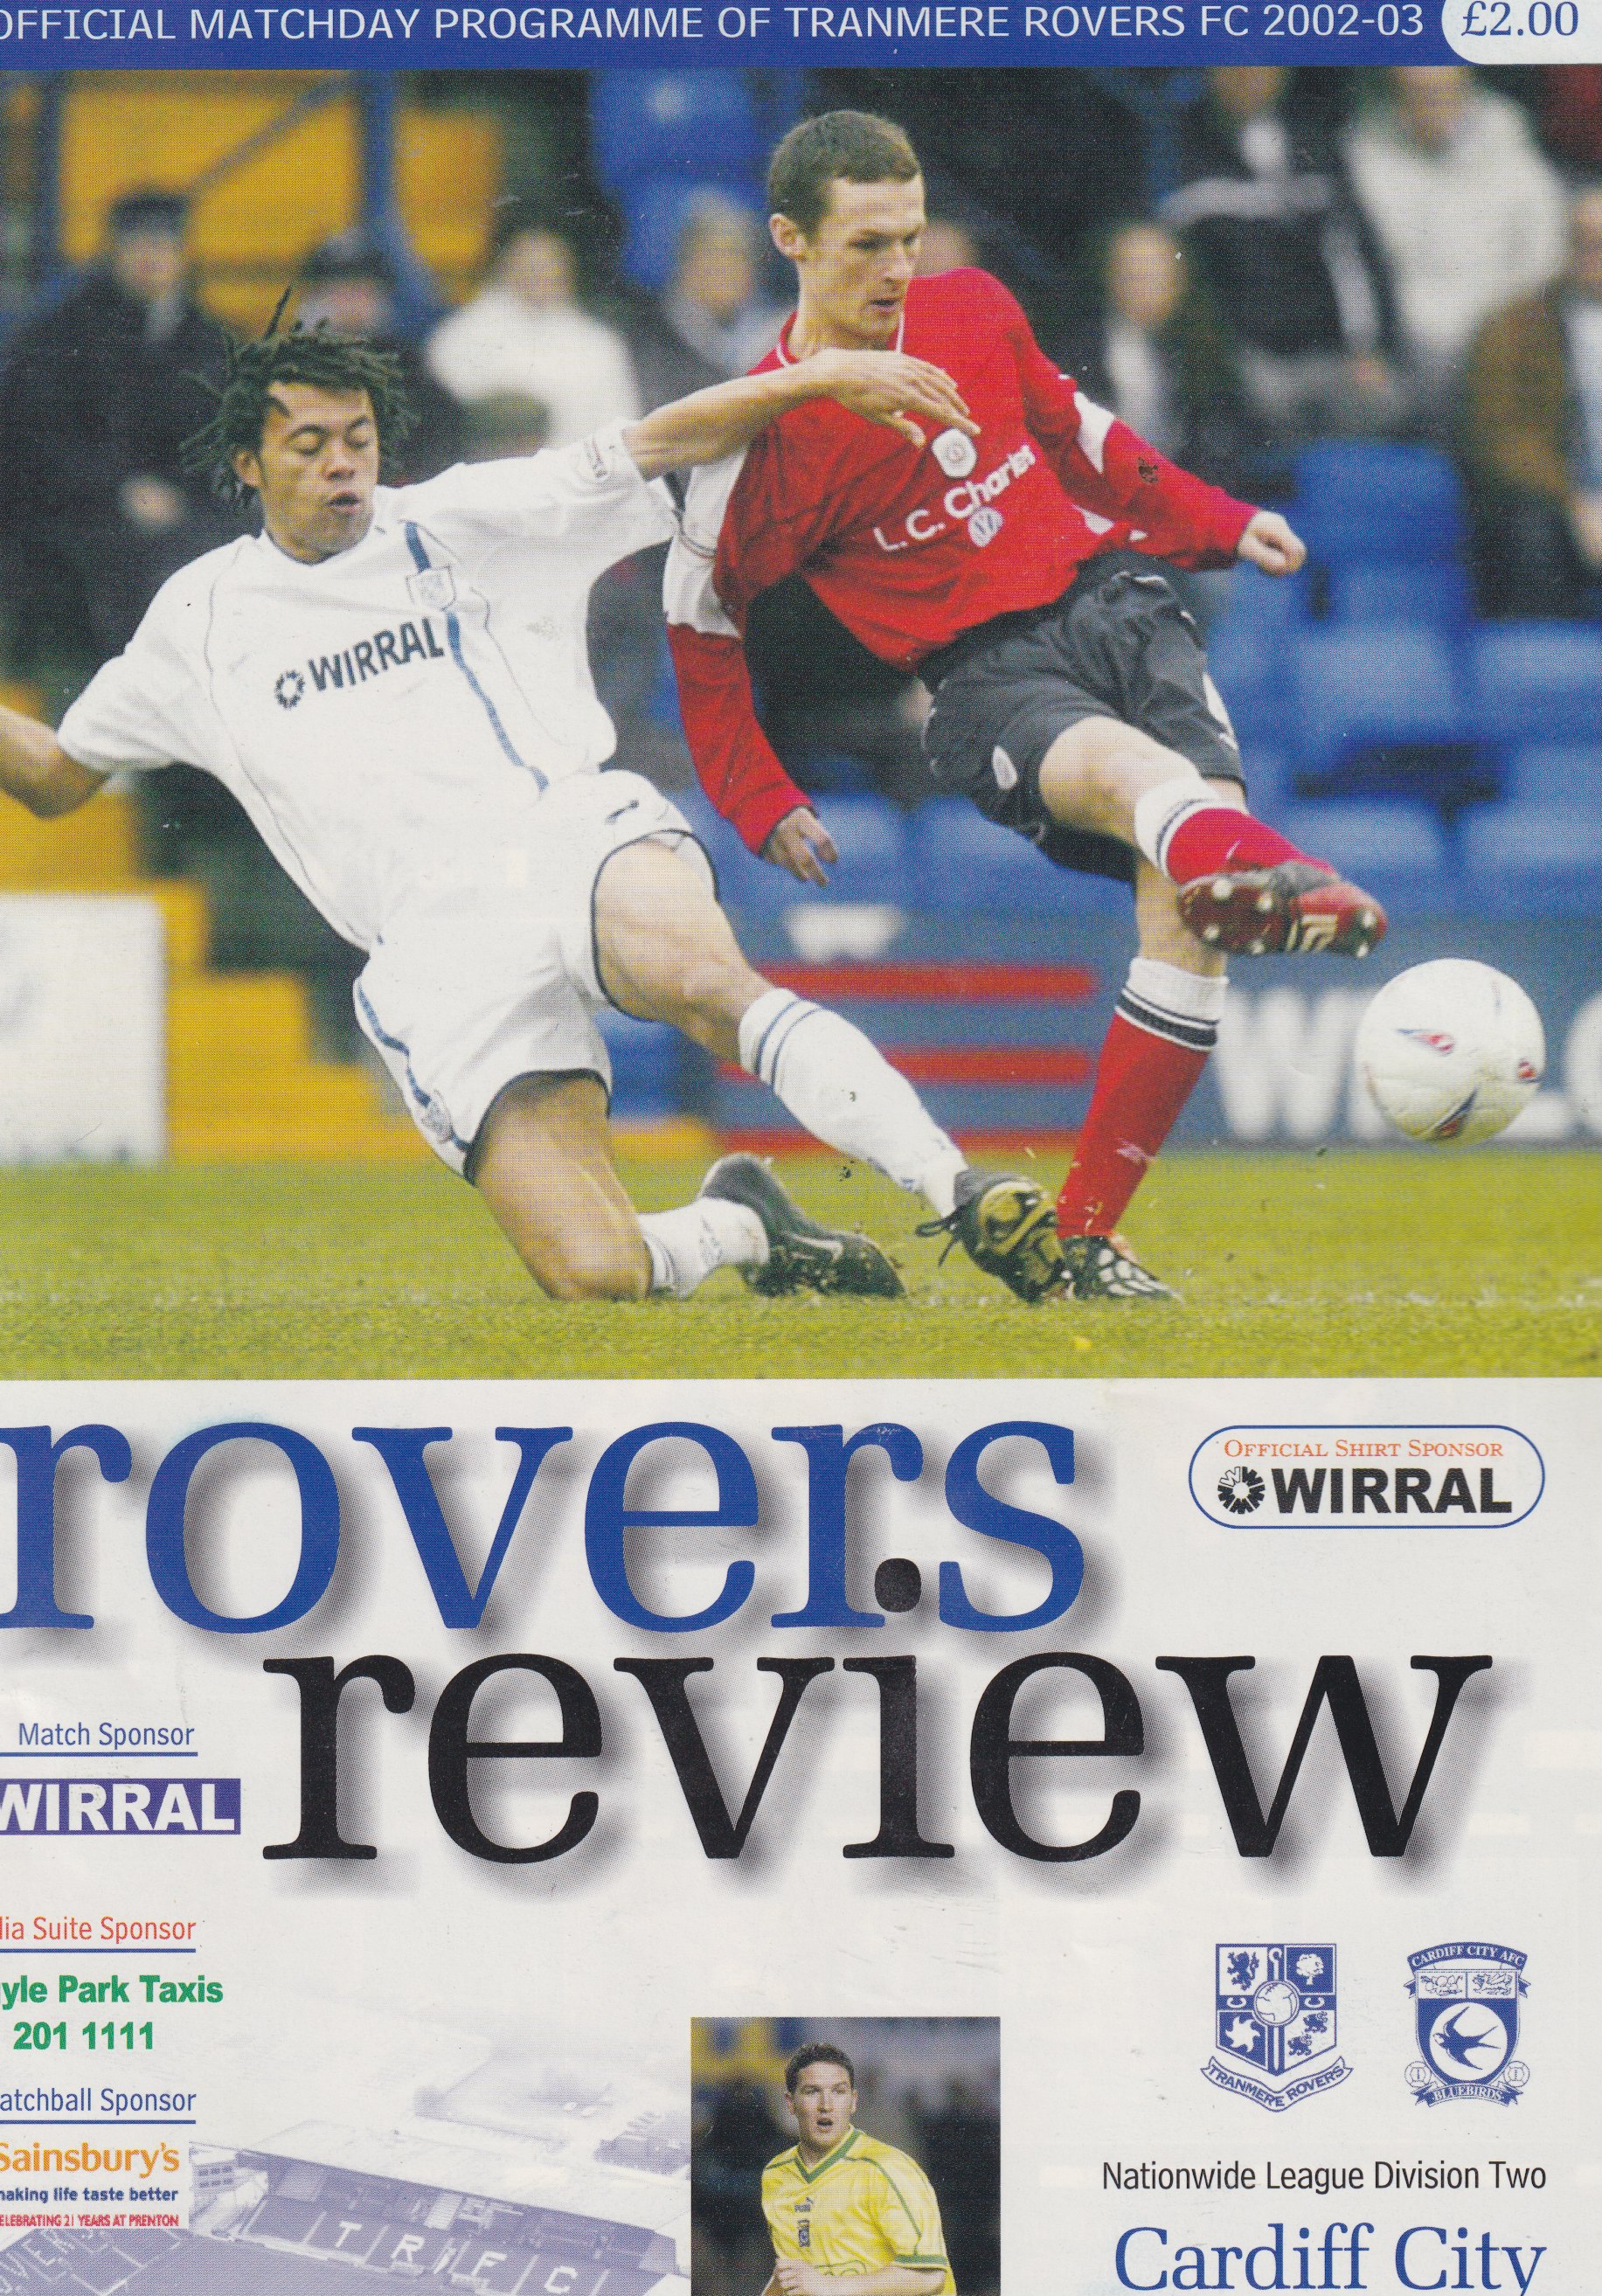 Match Programme For {home}} 3-3 Cardiff City, League, 2003-03-14